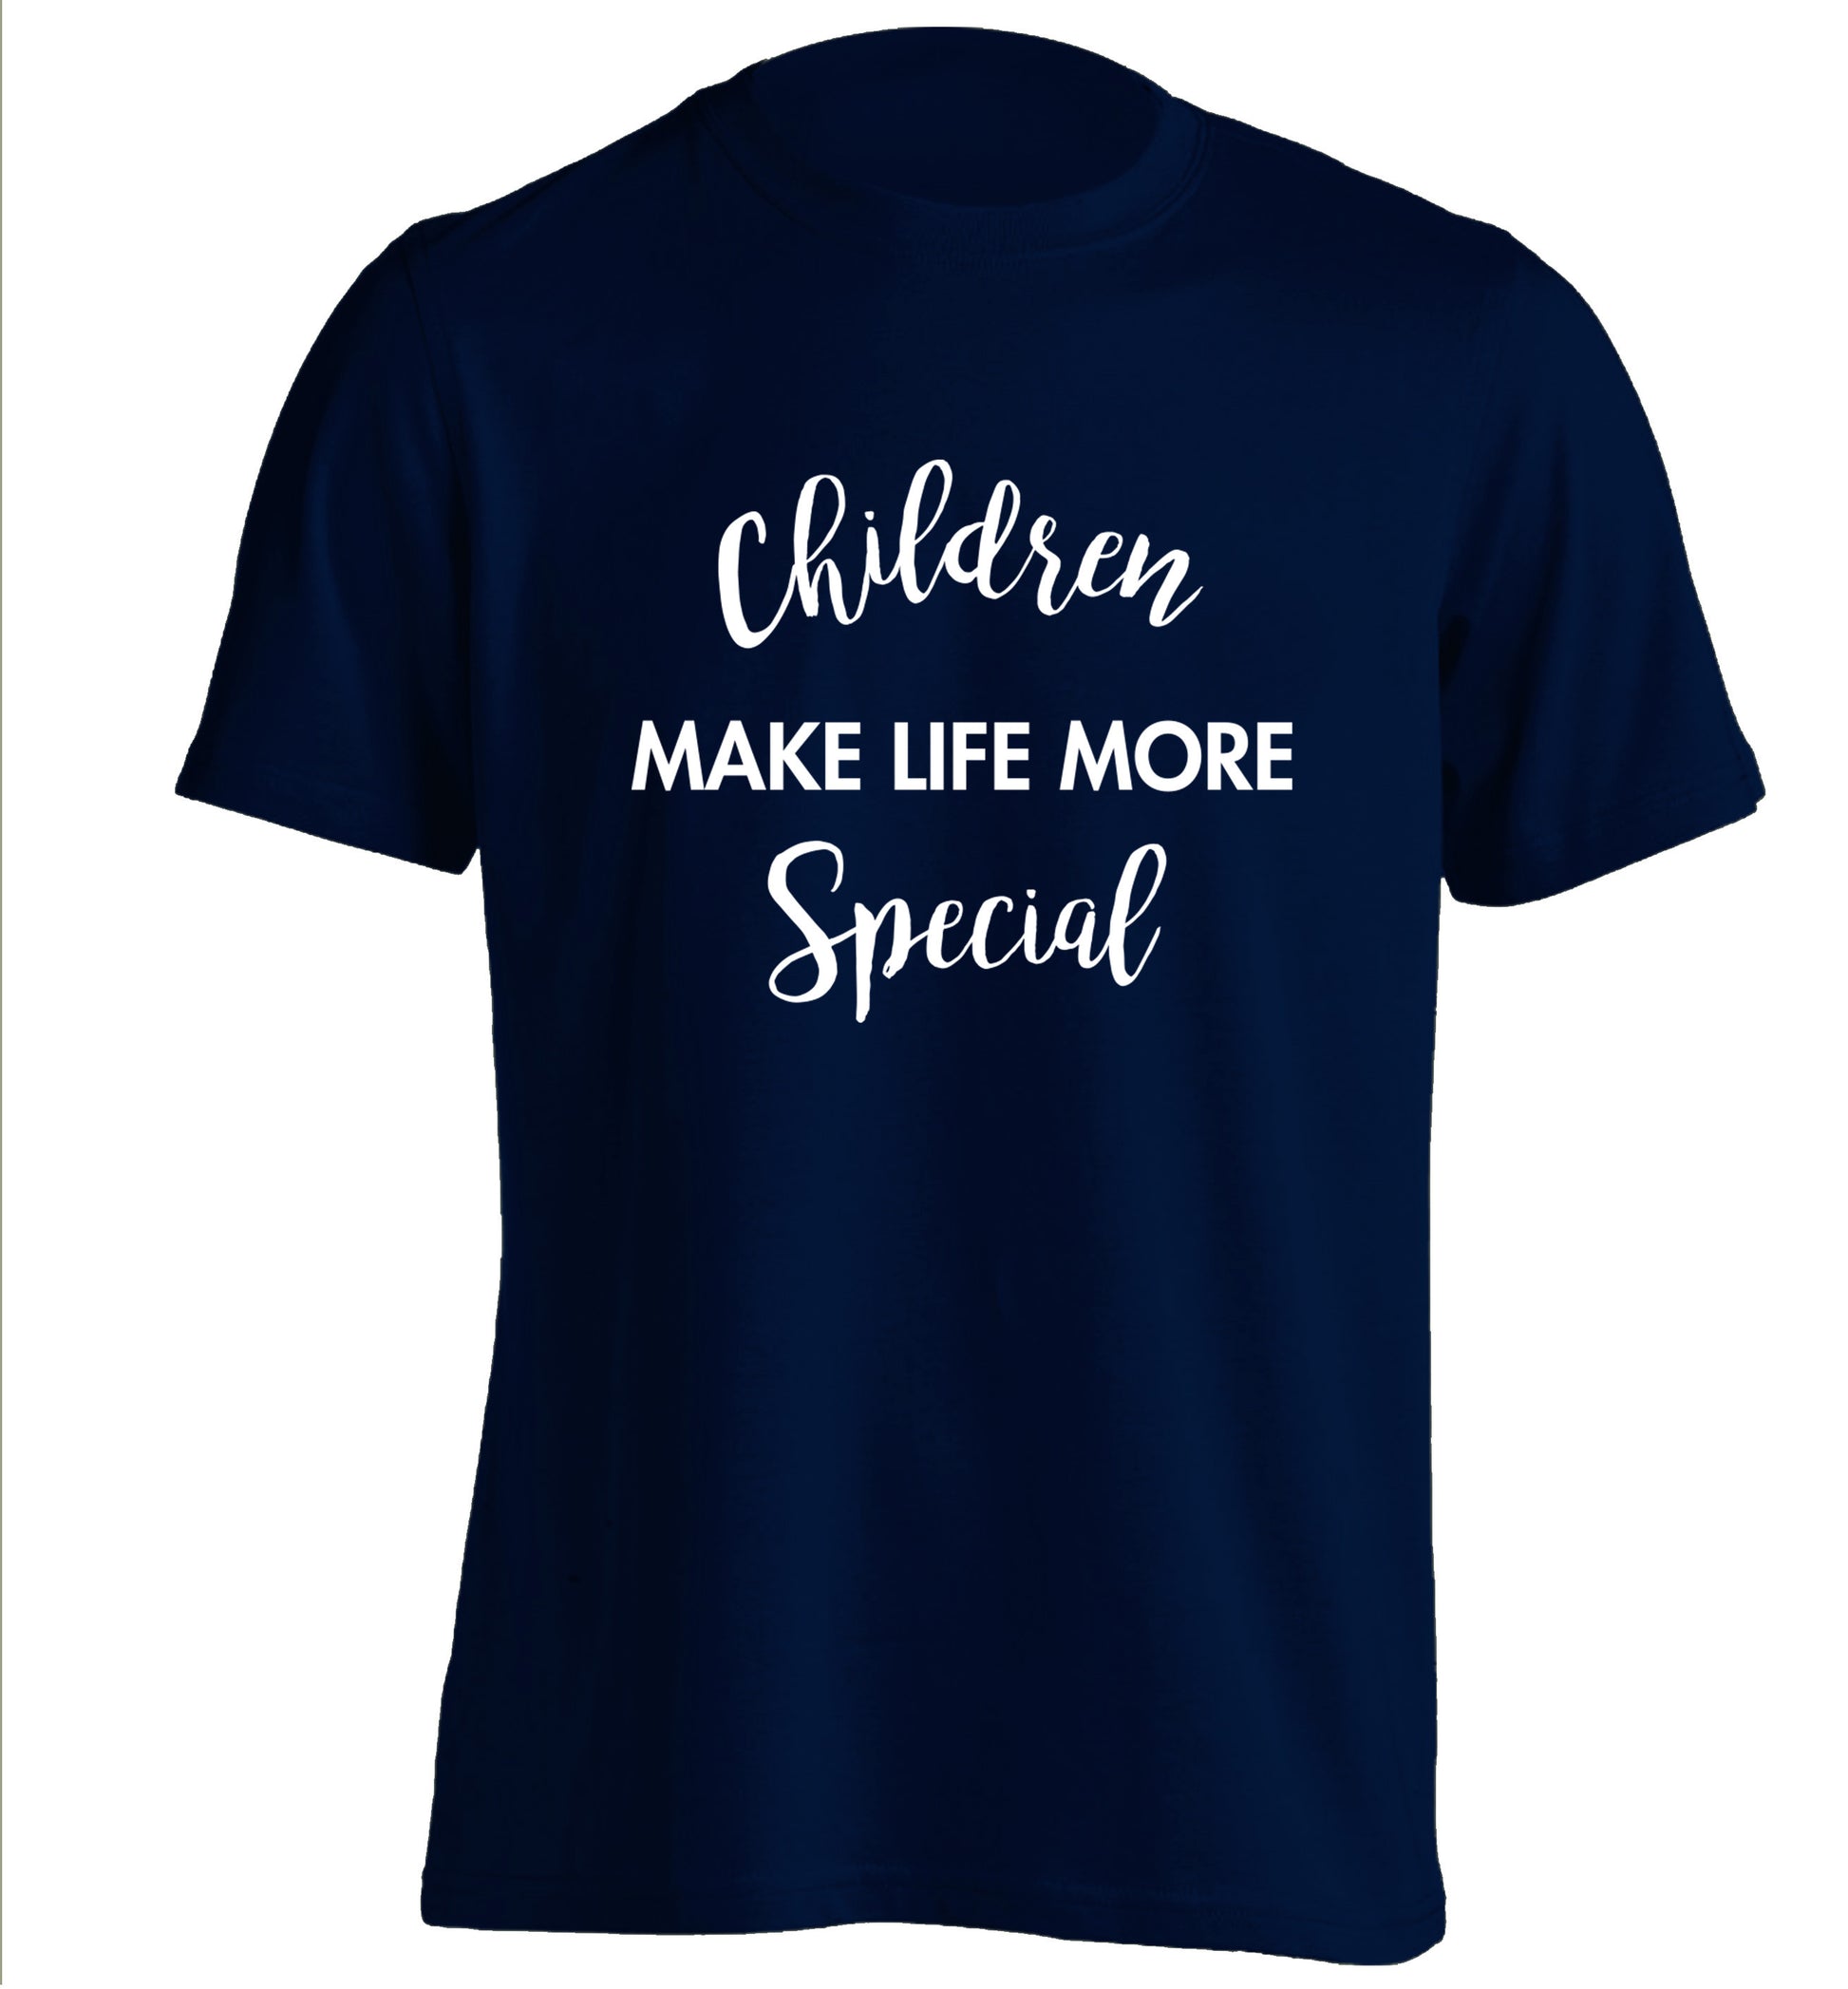 Children make life more special adults unisex navy Tshirt 2XL